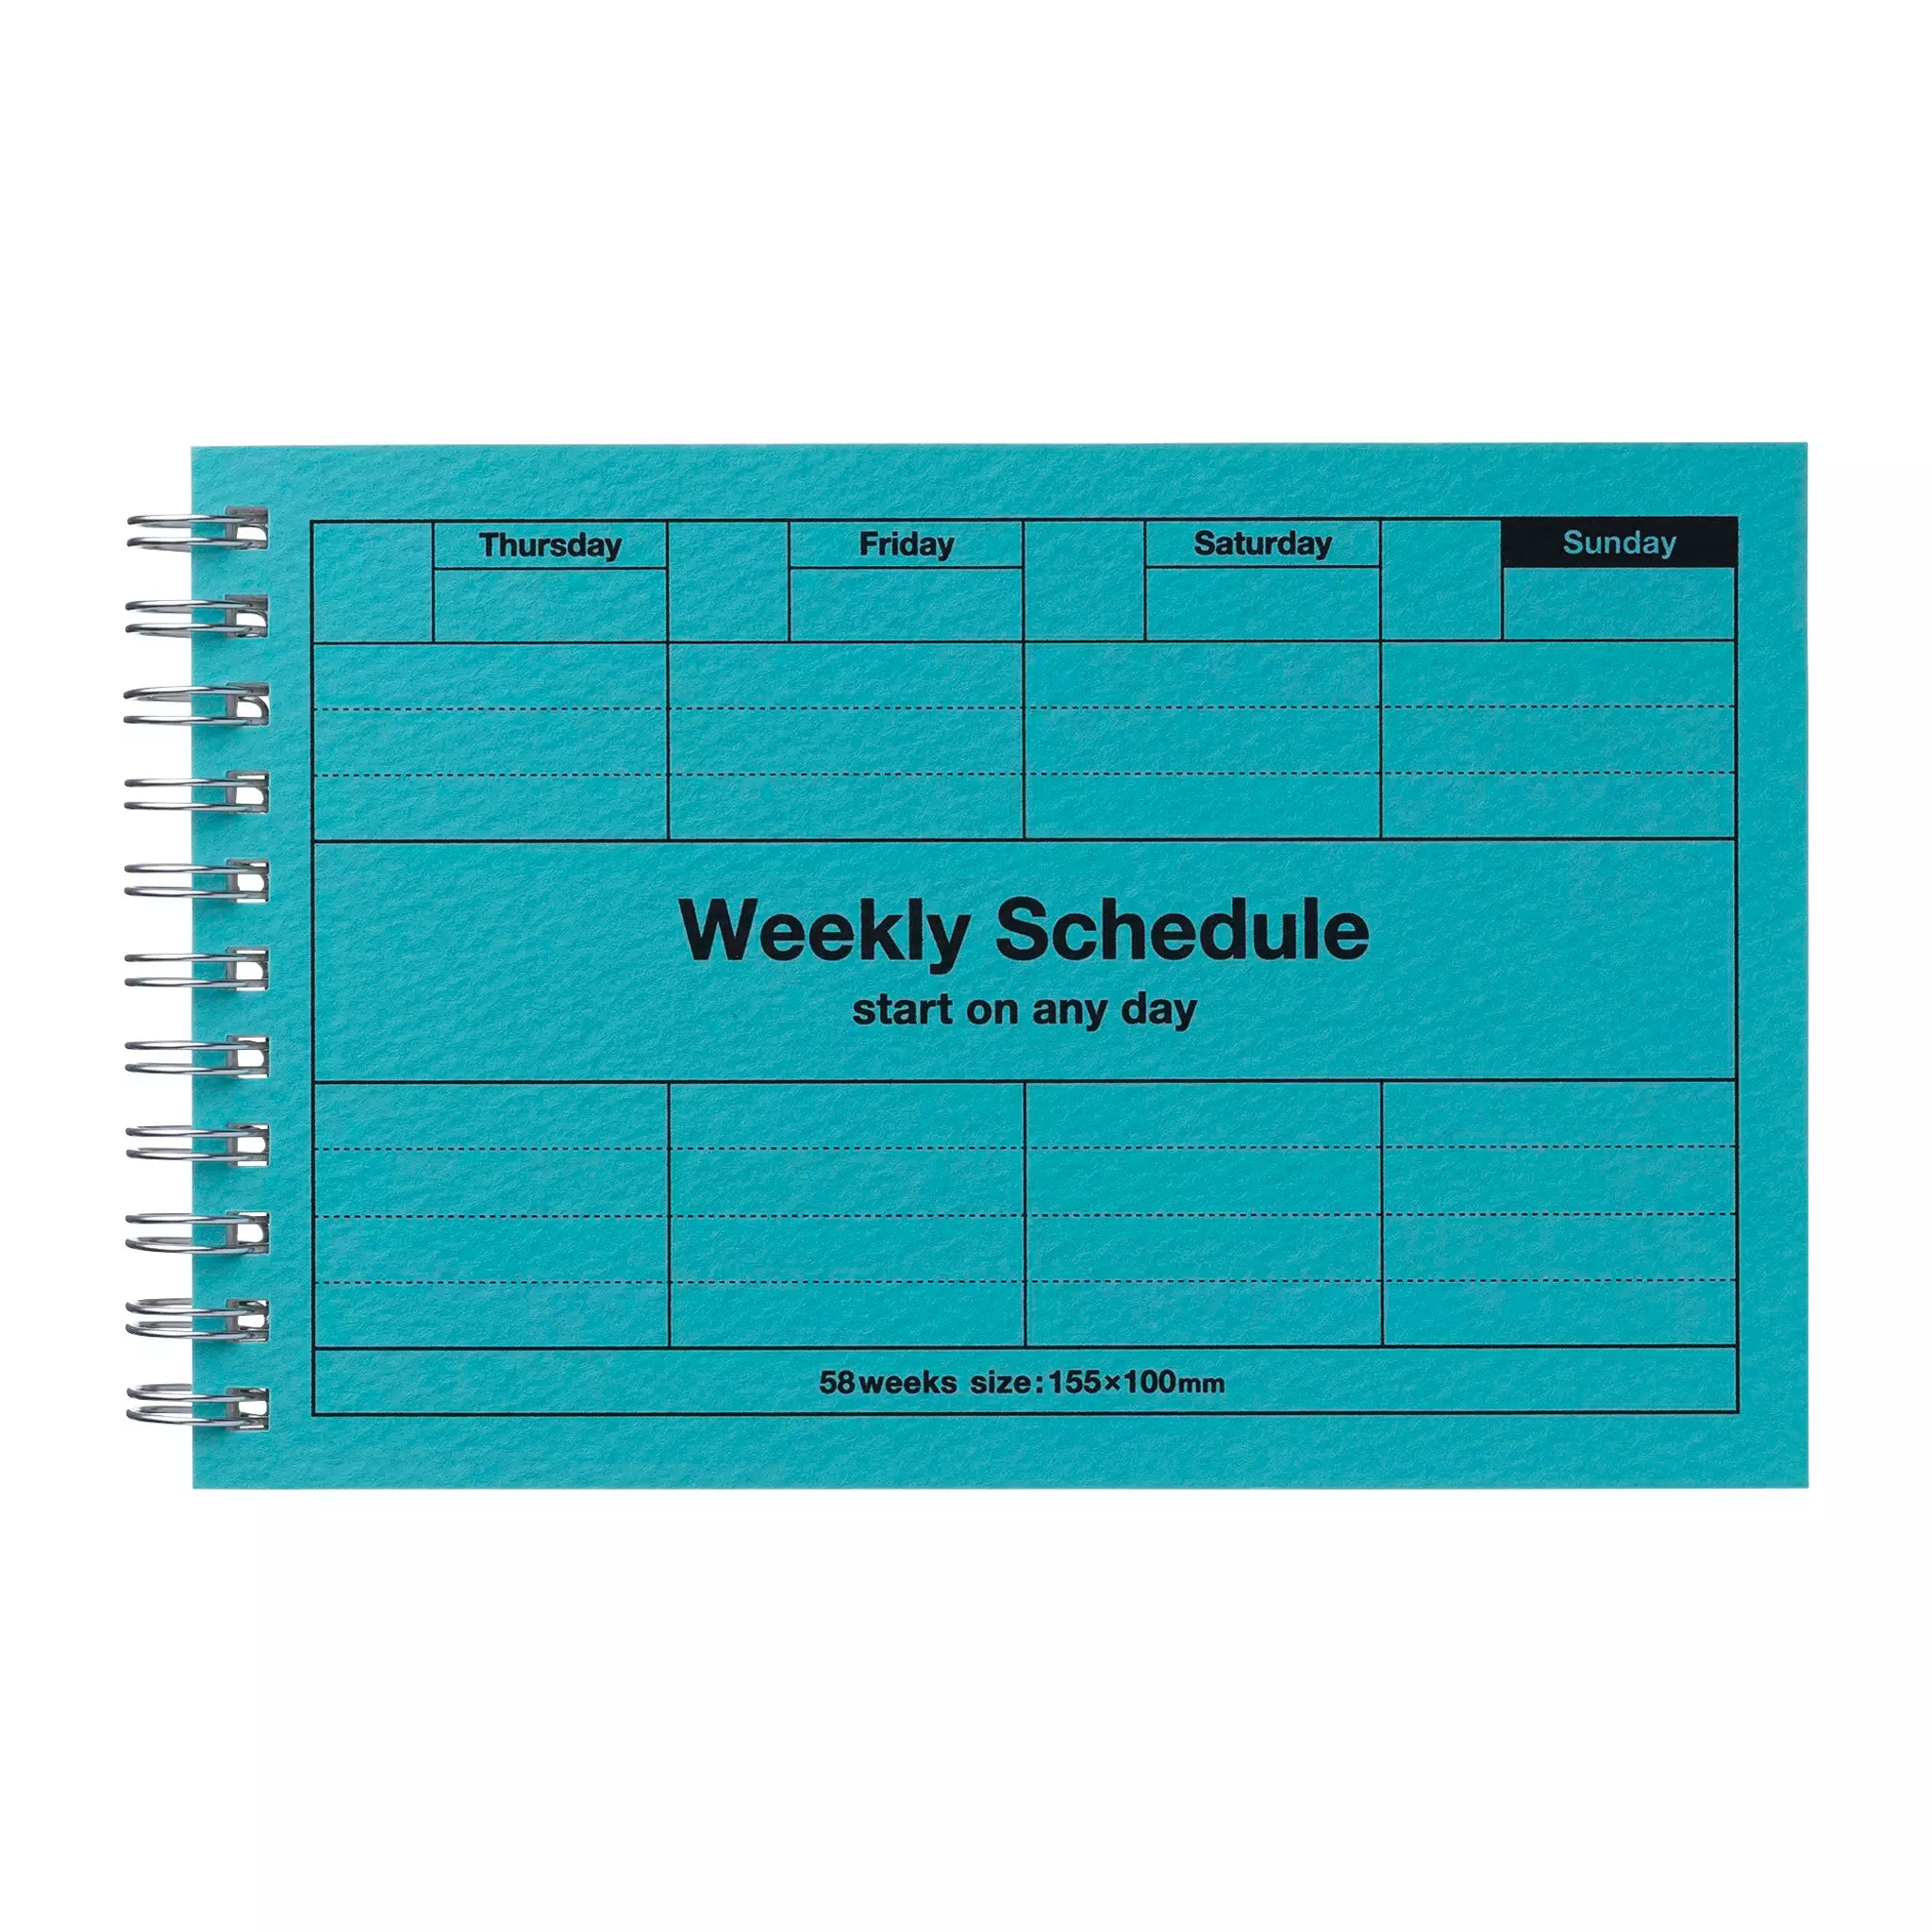 Weekly Schedule - Turquoise